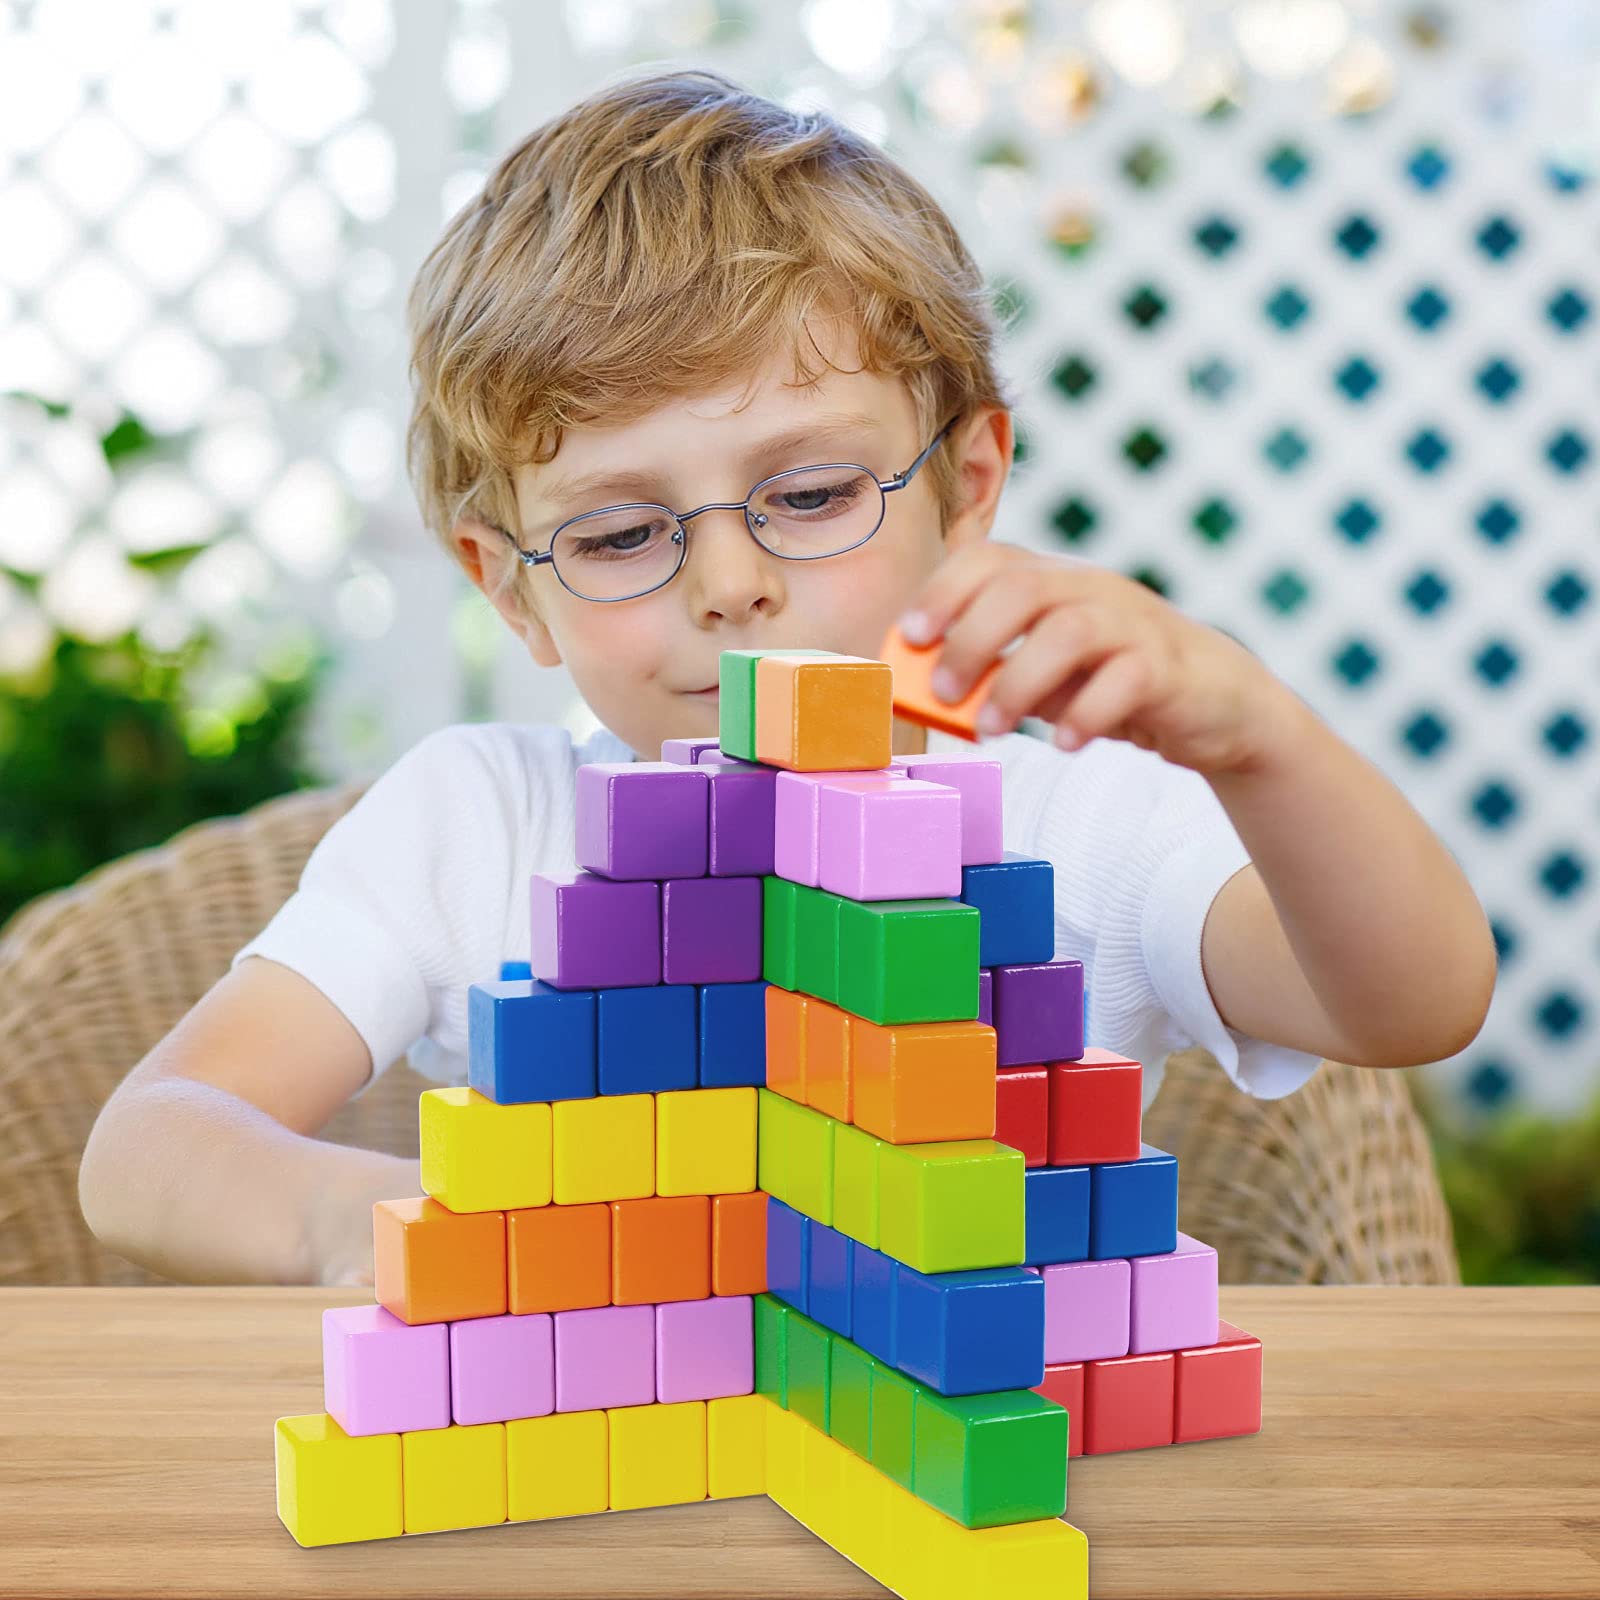 100PCS Wooden Building Blocks Stacking Game 1 Inch Rainbow Cubes Blocks Set Preschool Learning Educational Toys for Toddlers Boys Girls